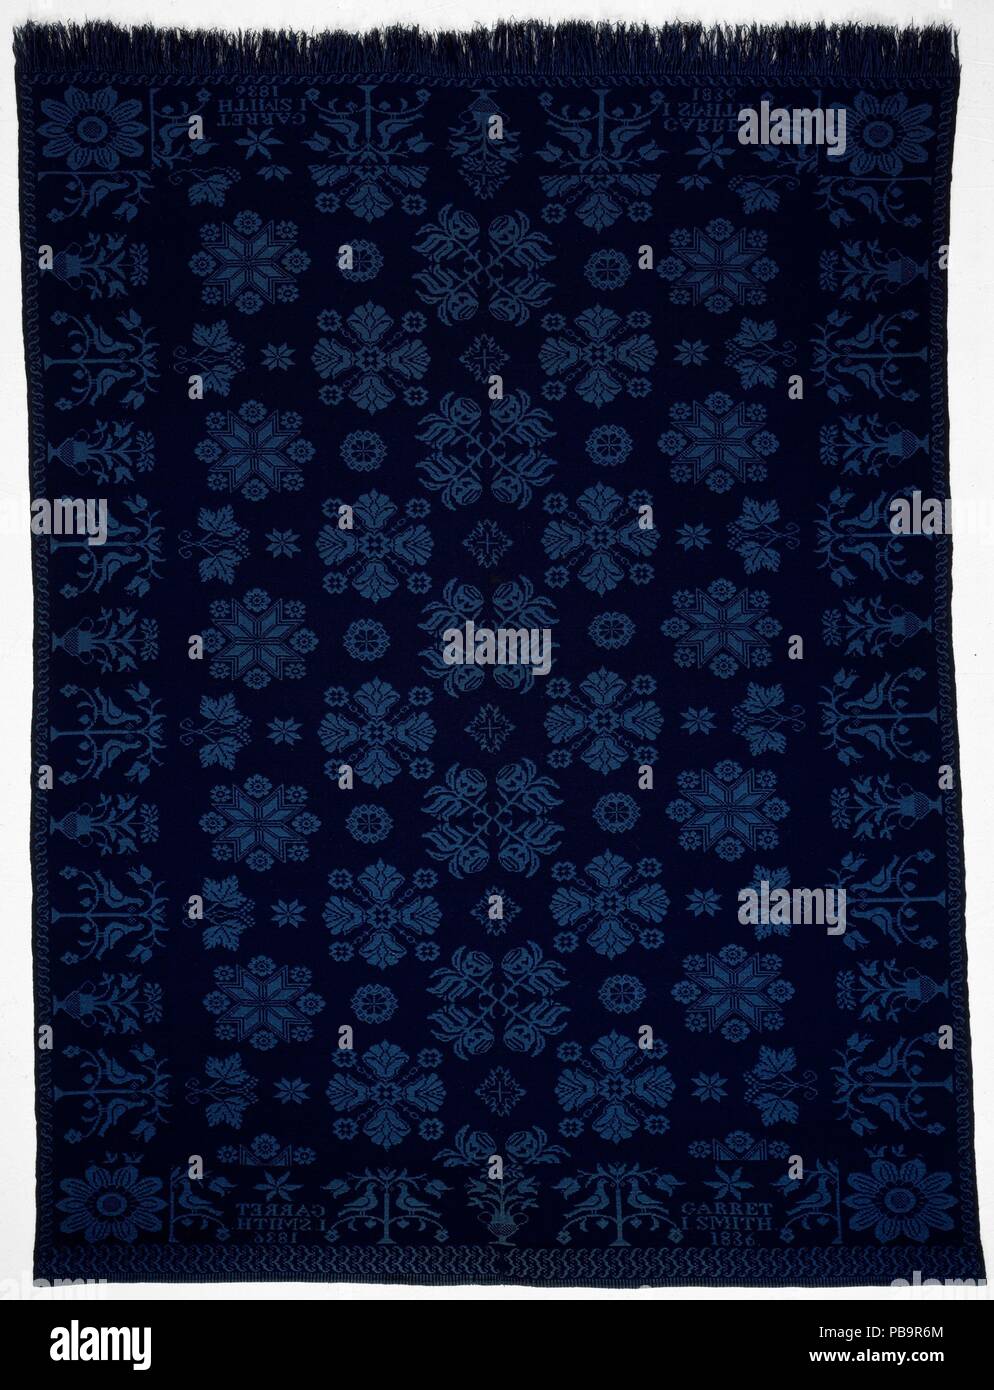 Coverlet. Culture: American. Dimensions: 98 x 71 1/2 in. (248.9 x 181.6 cm). Date: 1836.  This light and dark blue wool double cloth coverlet is woven in two panels and seamed at the center. The ground is decorated with various floral motifs associated with the Dutch weavers of the Bergen County, New Jersey/Rockland County, New York, area. The border is composed of birds and tree motifs alternating with vases of flowers. Each of the four corner blocks is decorated with a single large sunflower. The piece has a natural fringe along the bottom. Museum: Metropolitan Museum of Art, New York, USA. Stock Photo